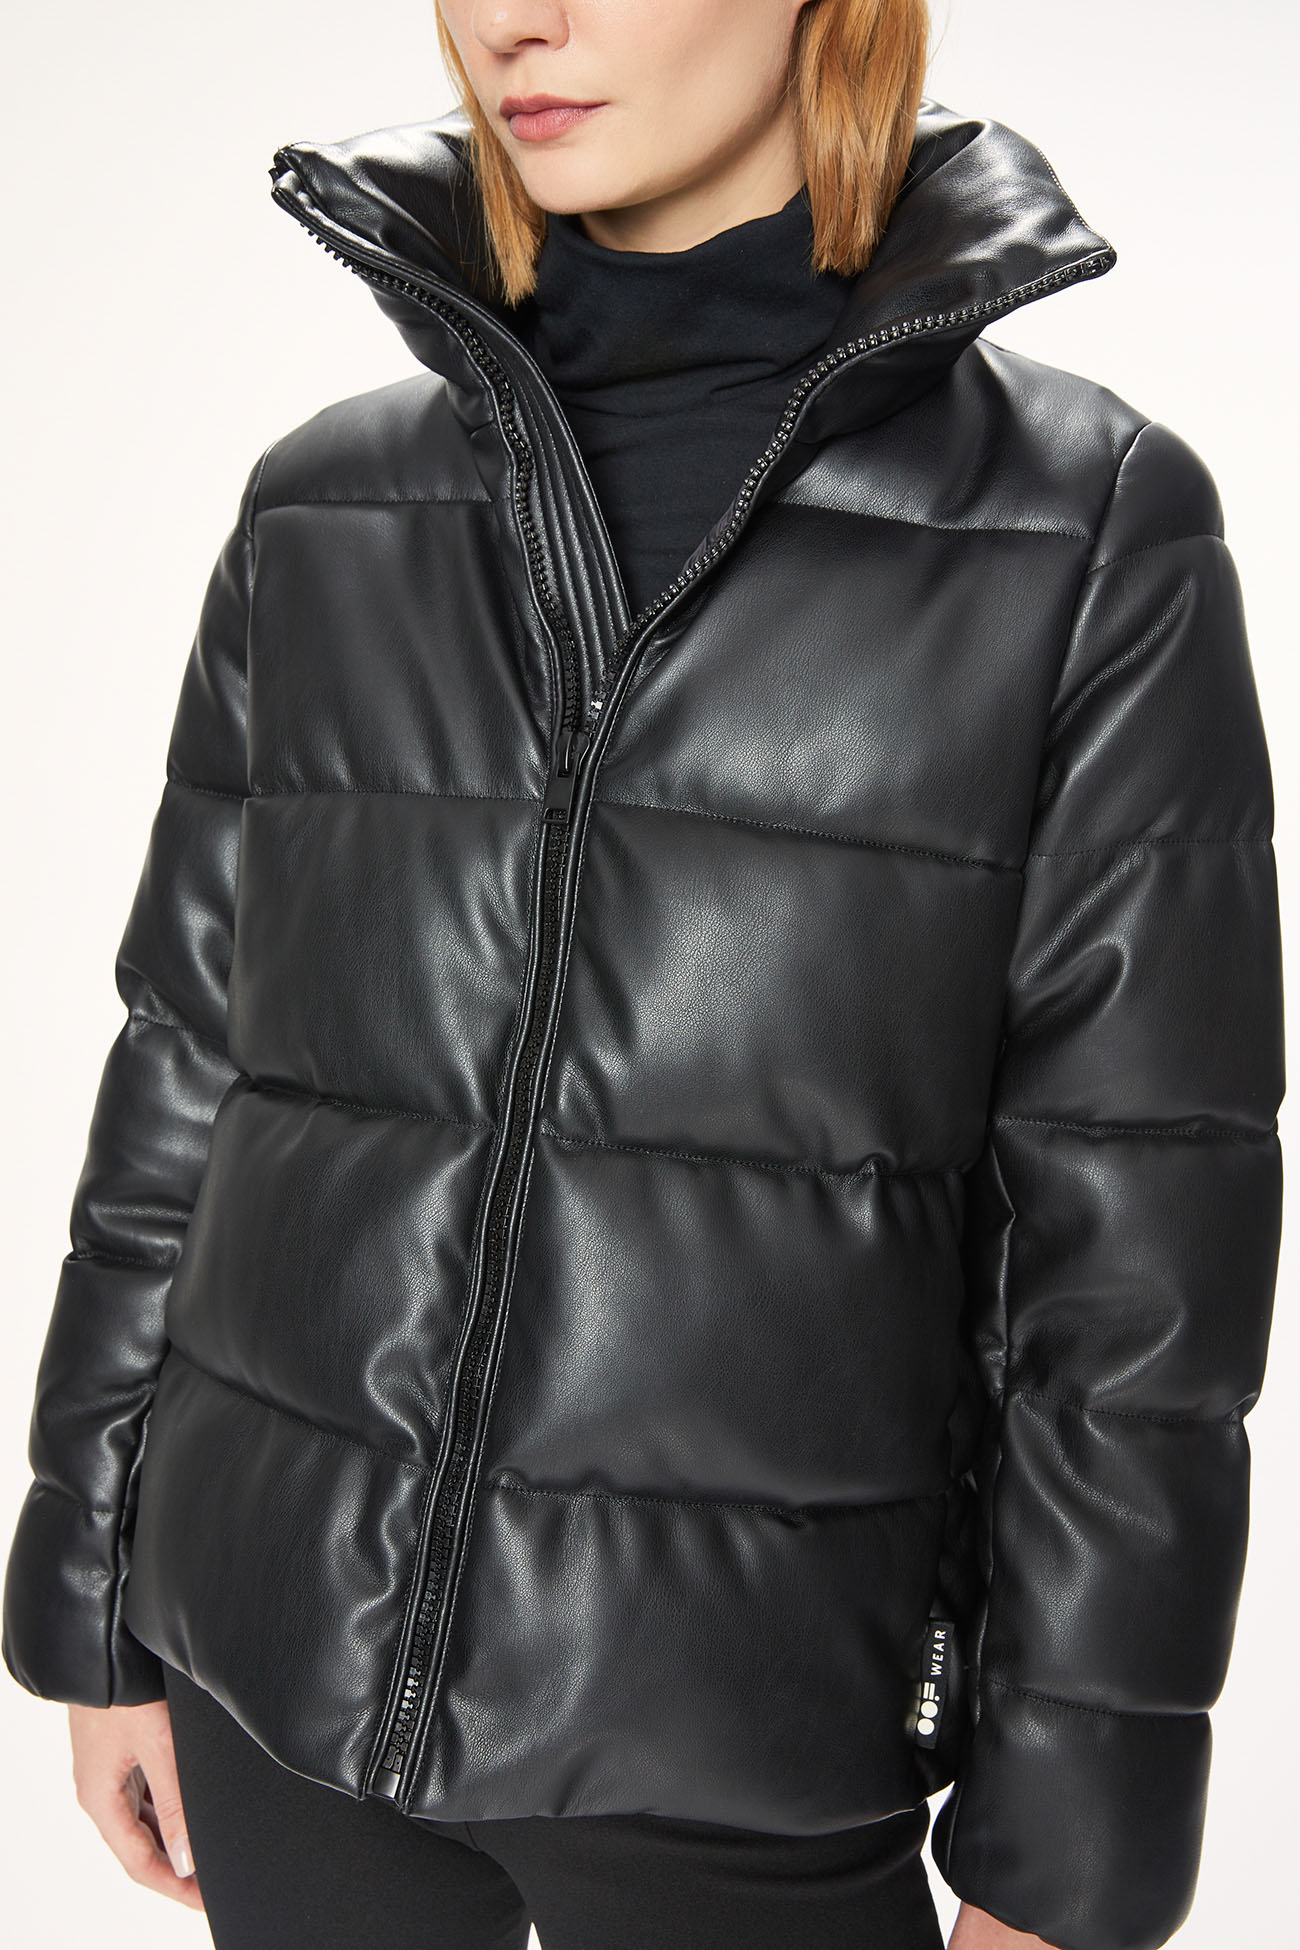 JACKET 9185 MADE IN ECO LEATHER - BLACK - OOF WEAR